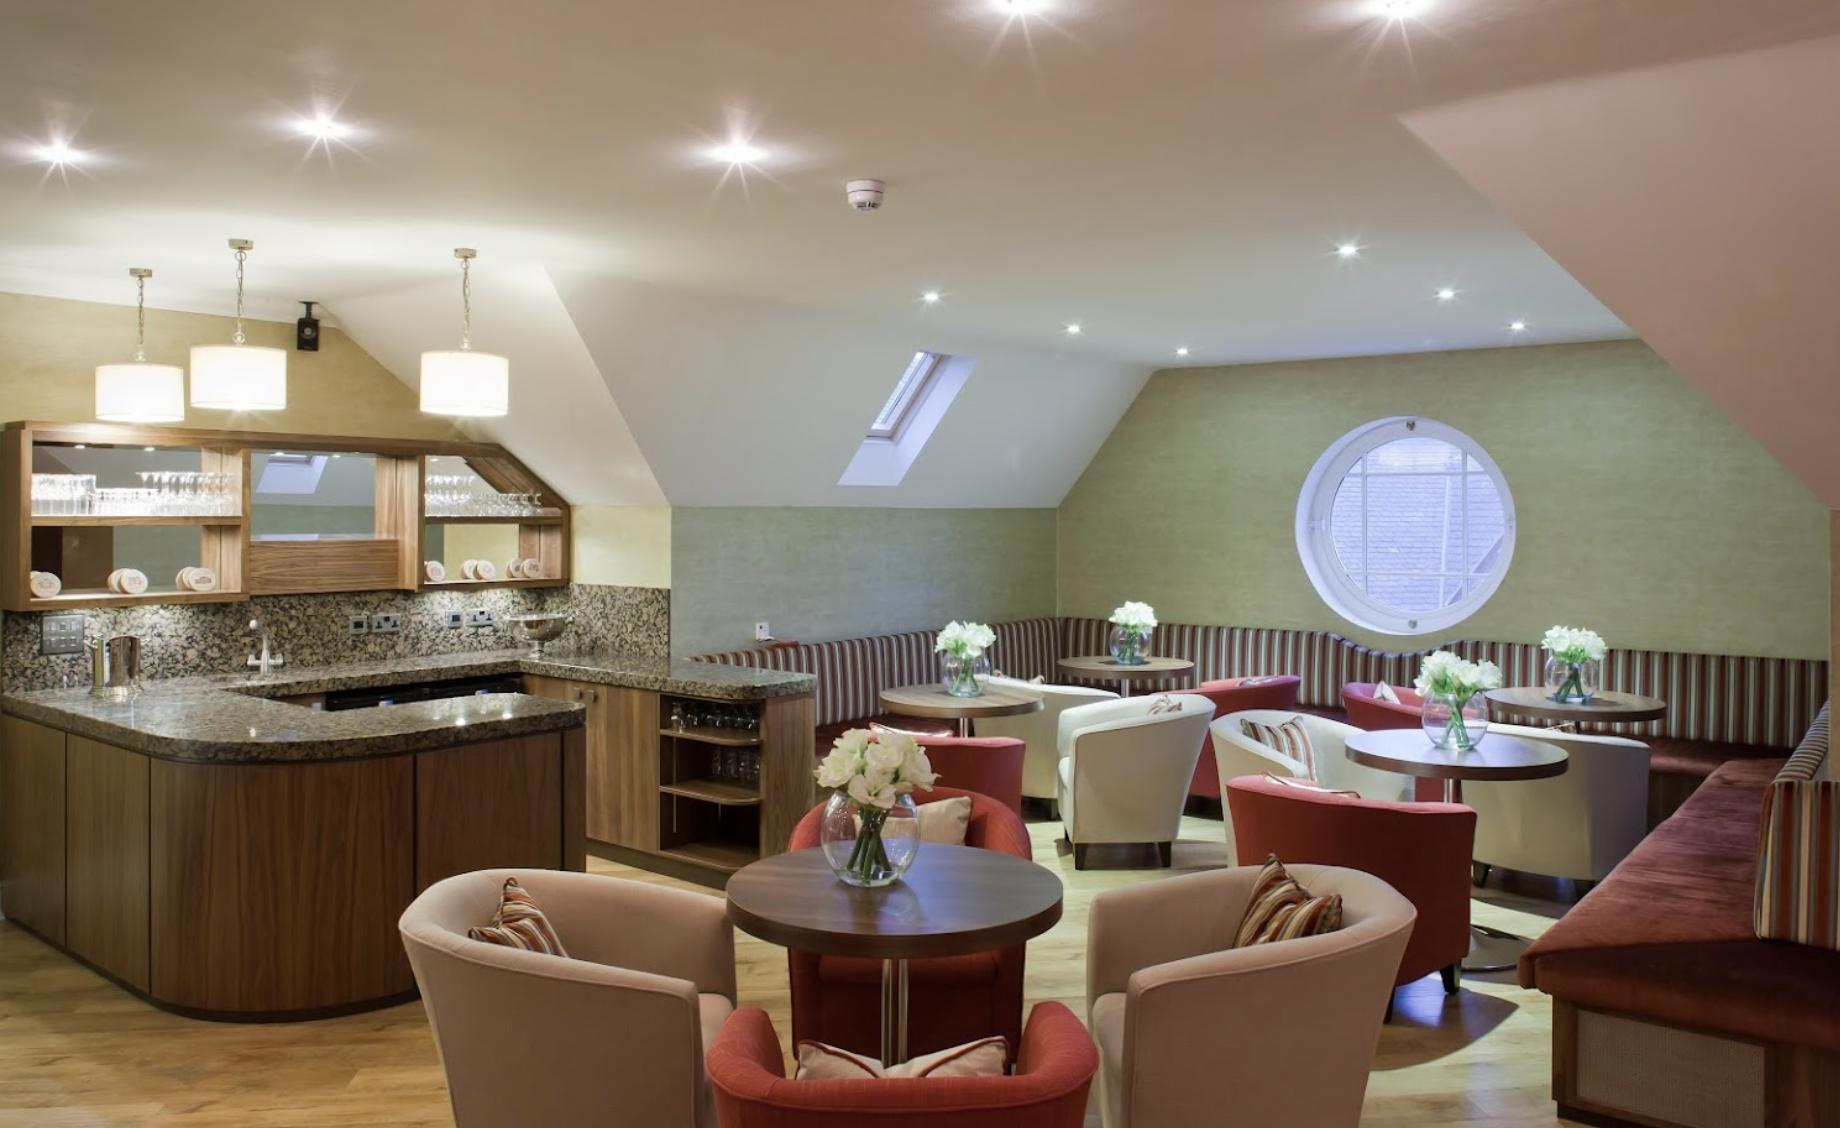 Dining Room at Ridley Park Care Home in Blyth, Northumberland